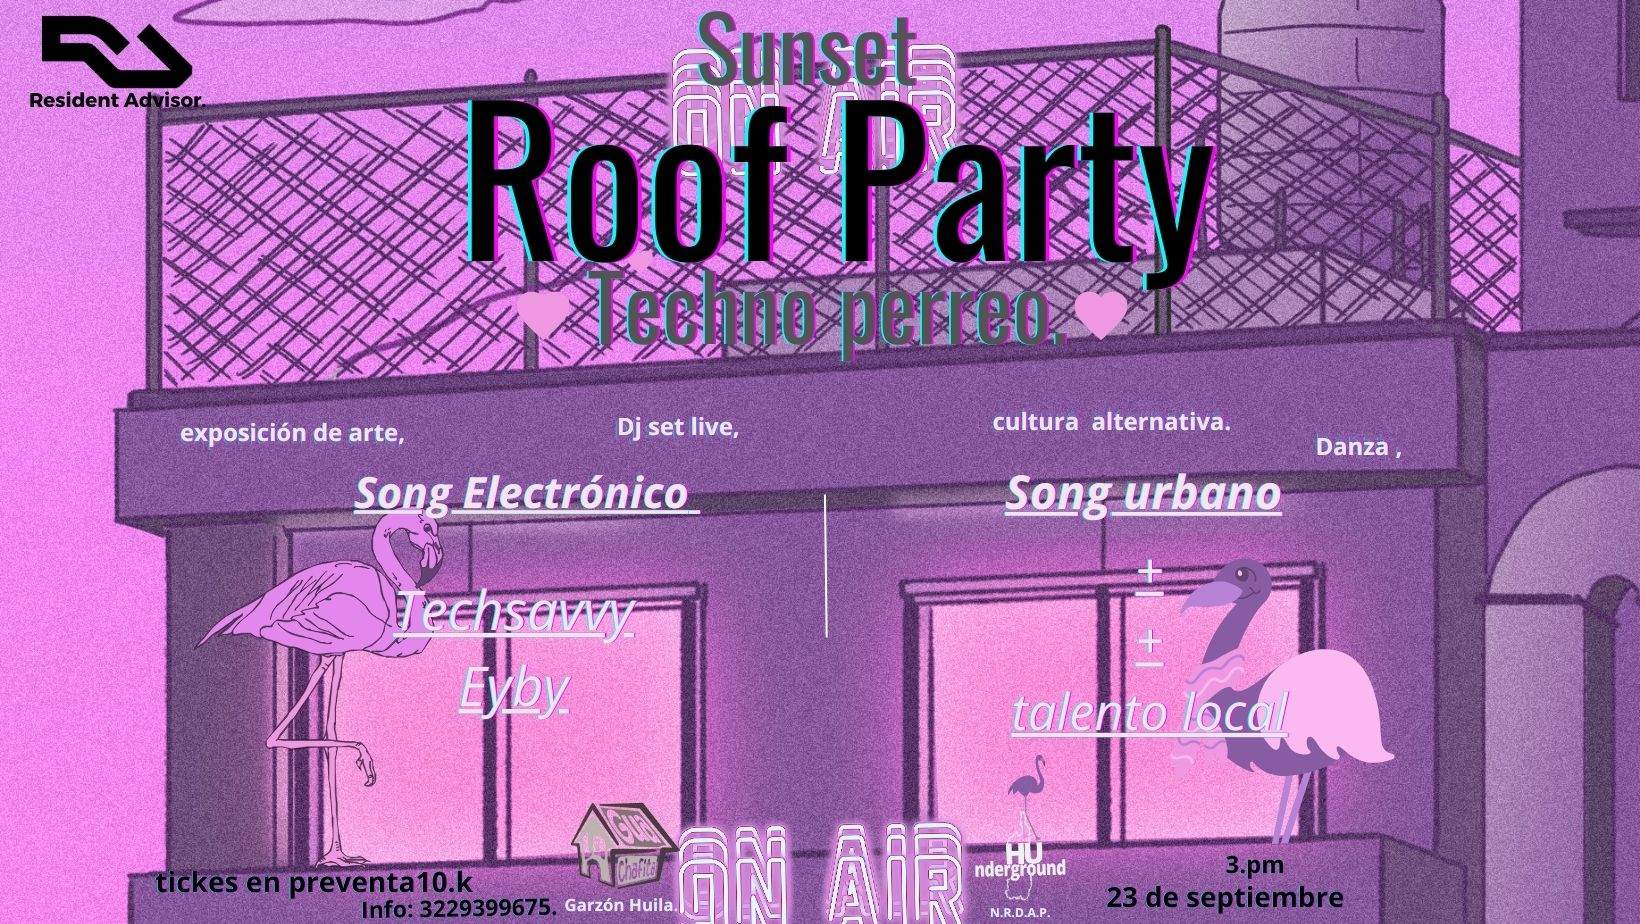 Sunset Roof Party - Página frontal